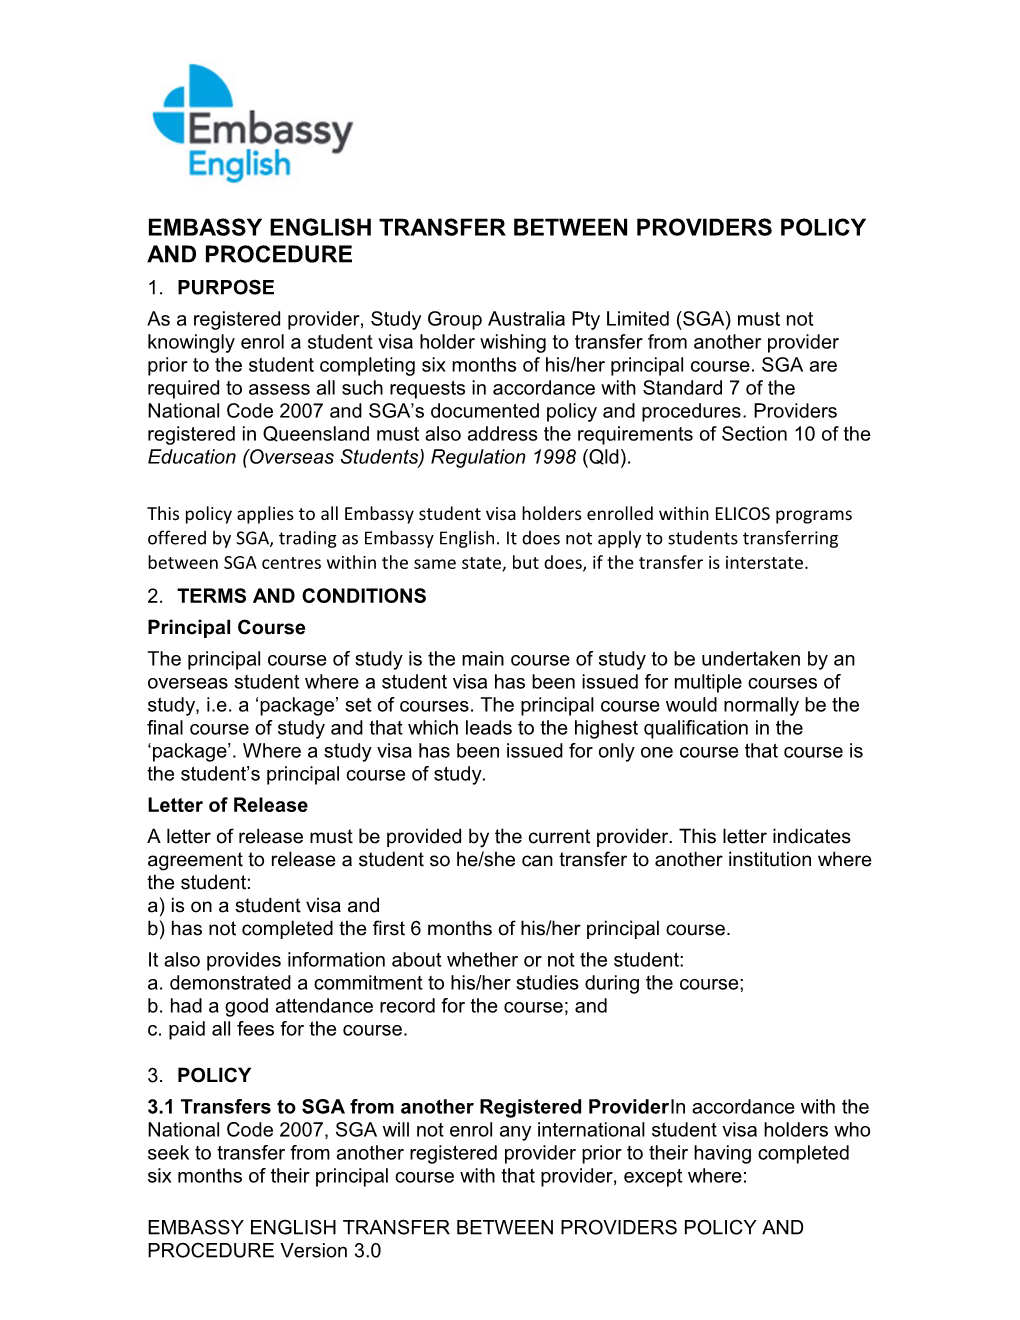 Embassy English Transfer Between Providers Policy and Procedure